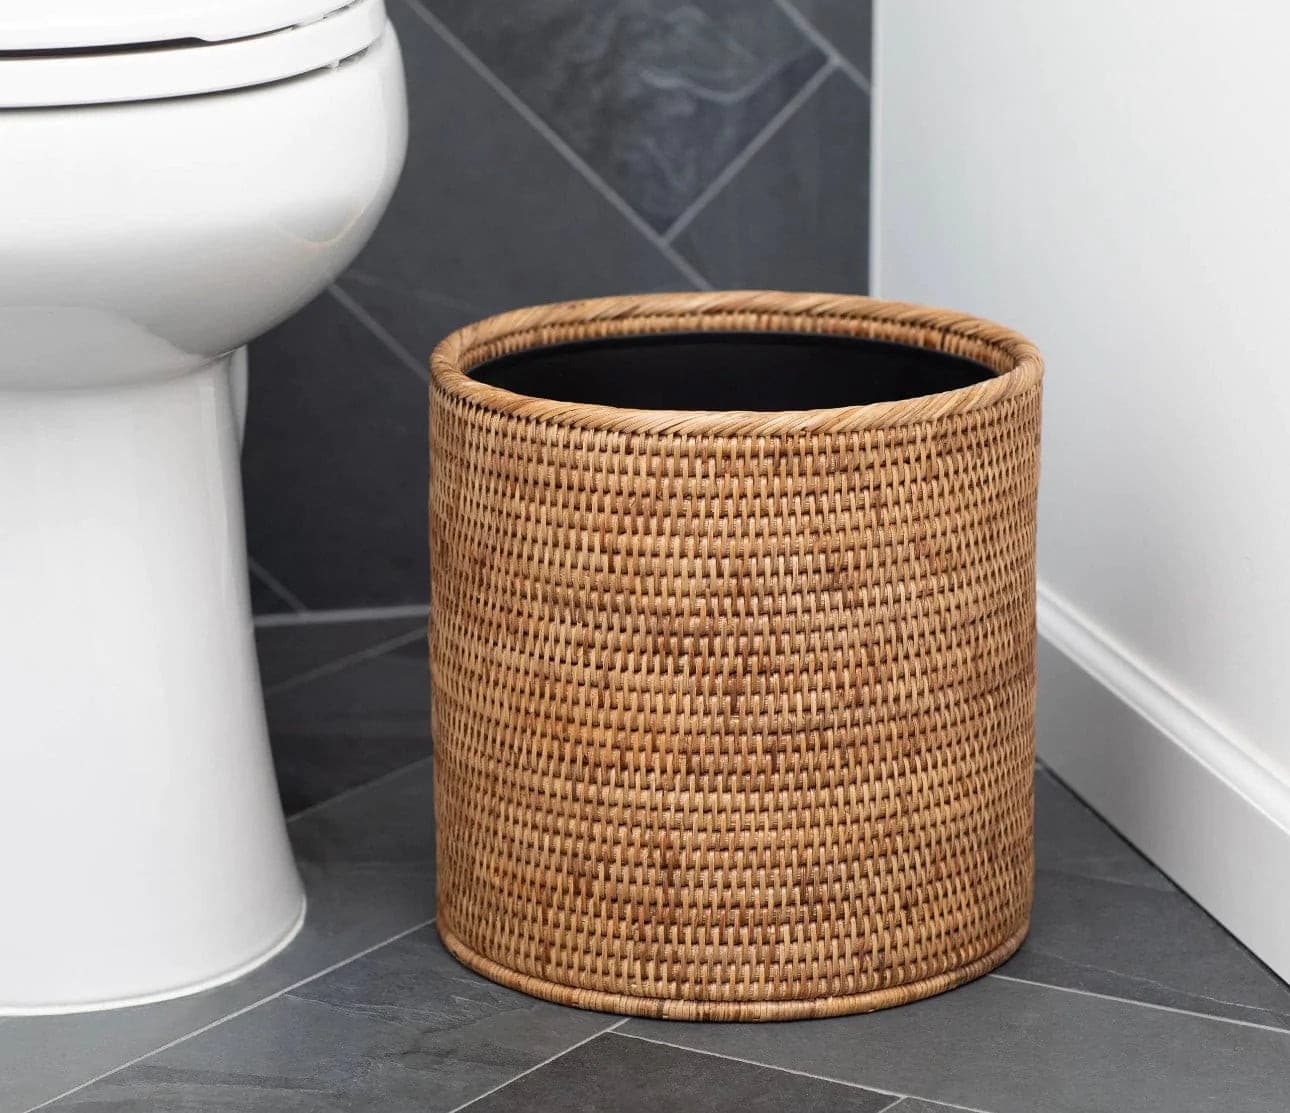 https://cdn.shopify.com/s/files/1/0339/3830/9257/products/rattan-round-waste-basket-with-metal-iiner-38806388867298.webp?v=1691781021